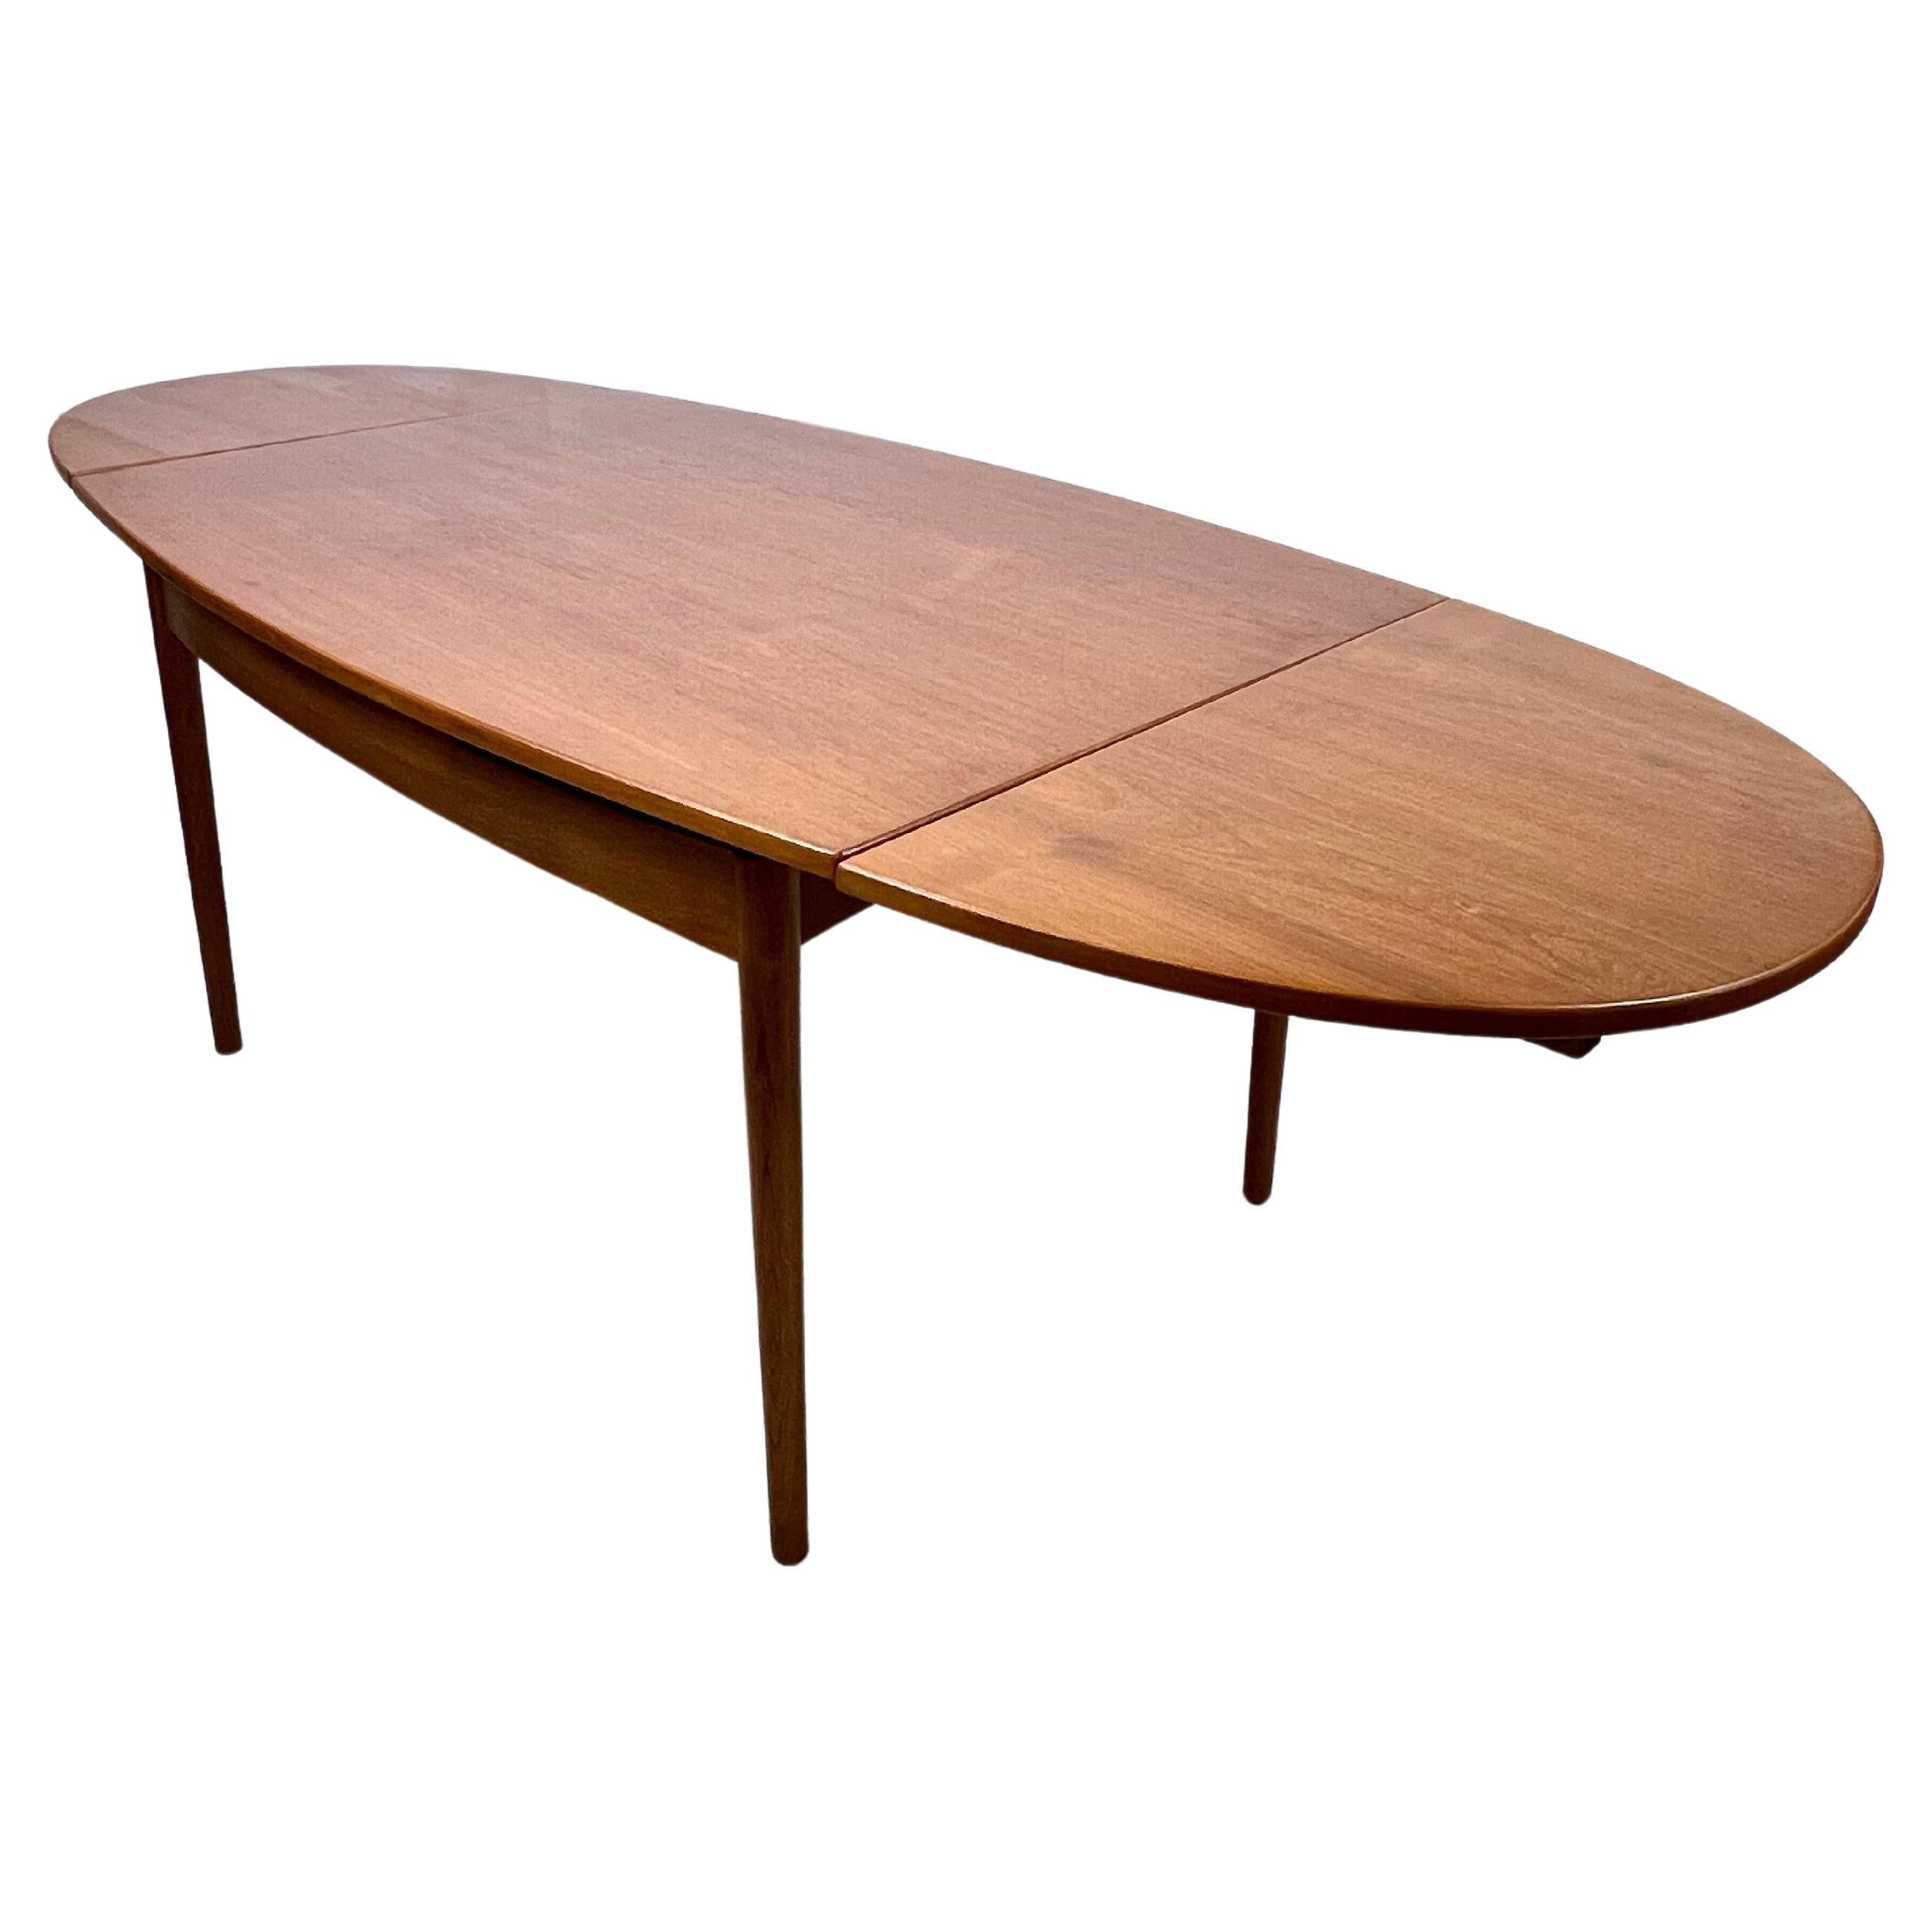 This vintage teak extendable dining table from G Plan UK, dating back to the 1960s, exudes timeless elegance and functionality. With its rich teak wood construction and sleek mid-century modern design, this table is a show-stopping centrepiece for